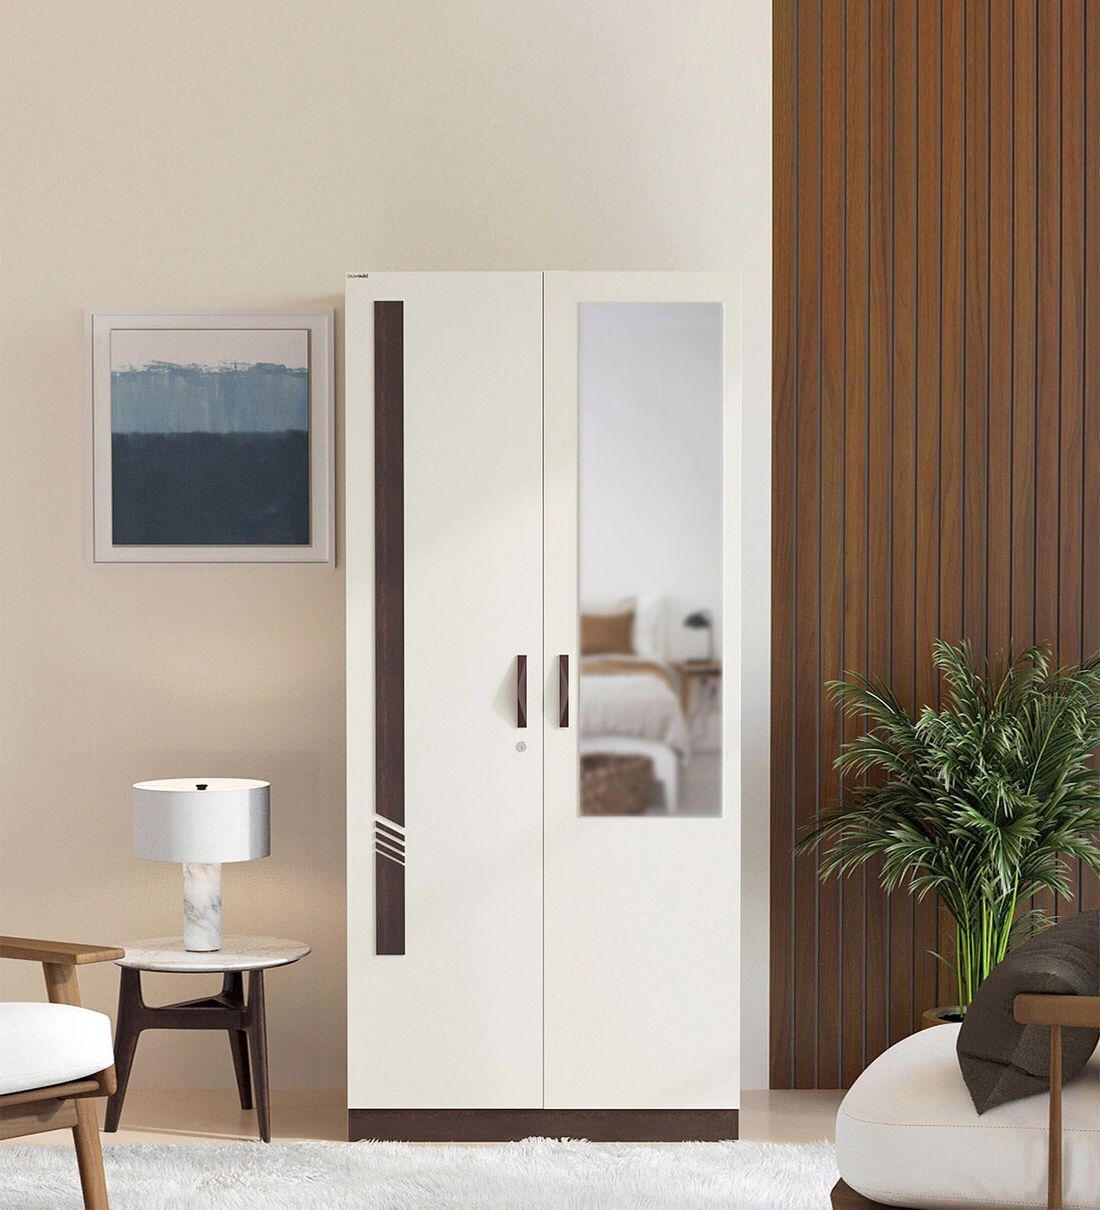 [%buy Andrie 2 Door Wardrobe In Wenge & White Finish With Mirror At 26% Off Bluewud | Pepperfry Throughout Preferred 2 Door Wardrobes|2 Door Wardrobes Pertaining To Preferred Buy Andrie 2 Door Wardrobe In Wenge & White Finish With Mirror At 26% Off Bluewud | Pepperfry|most Recent 2 Door Wardrobes With Regard To Buy Andrie 2 Door Wardrobe In Wenge & White Finish With Mirror At 26% Off Bluewud | Pepperfry|latest Buy Andrie 2 Door Wardrobe In Wenge & White Finish With Mirror At 26% Off Bluewud | Pepperfry Inside 2 Door Wardrobes%] (Photo 9 of 10)